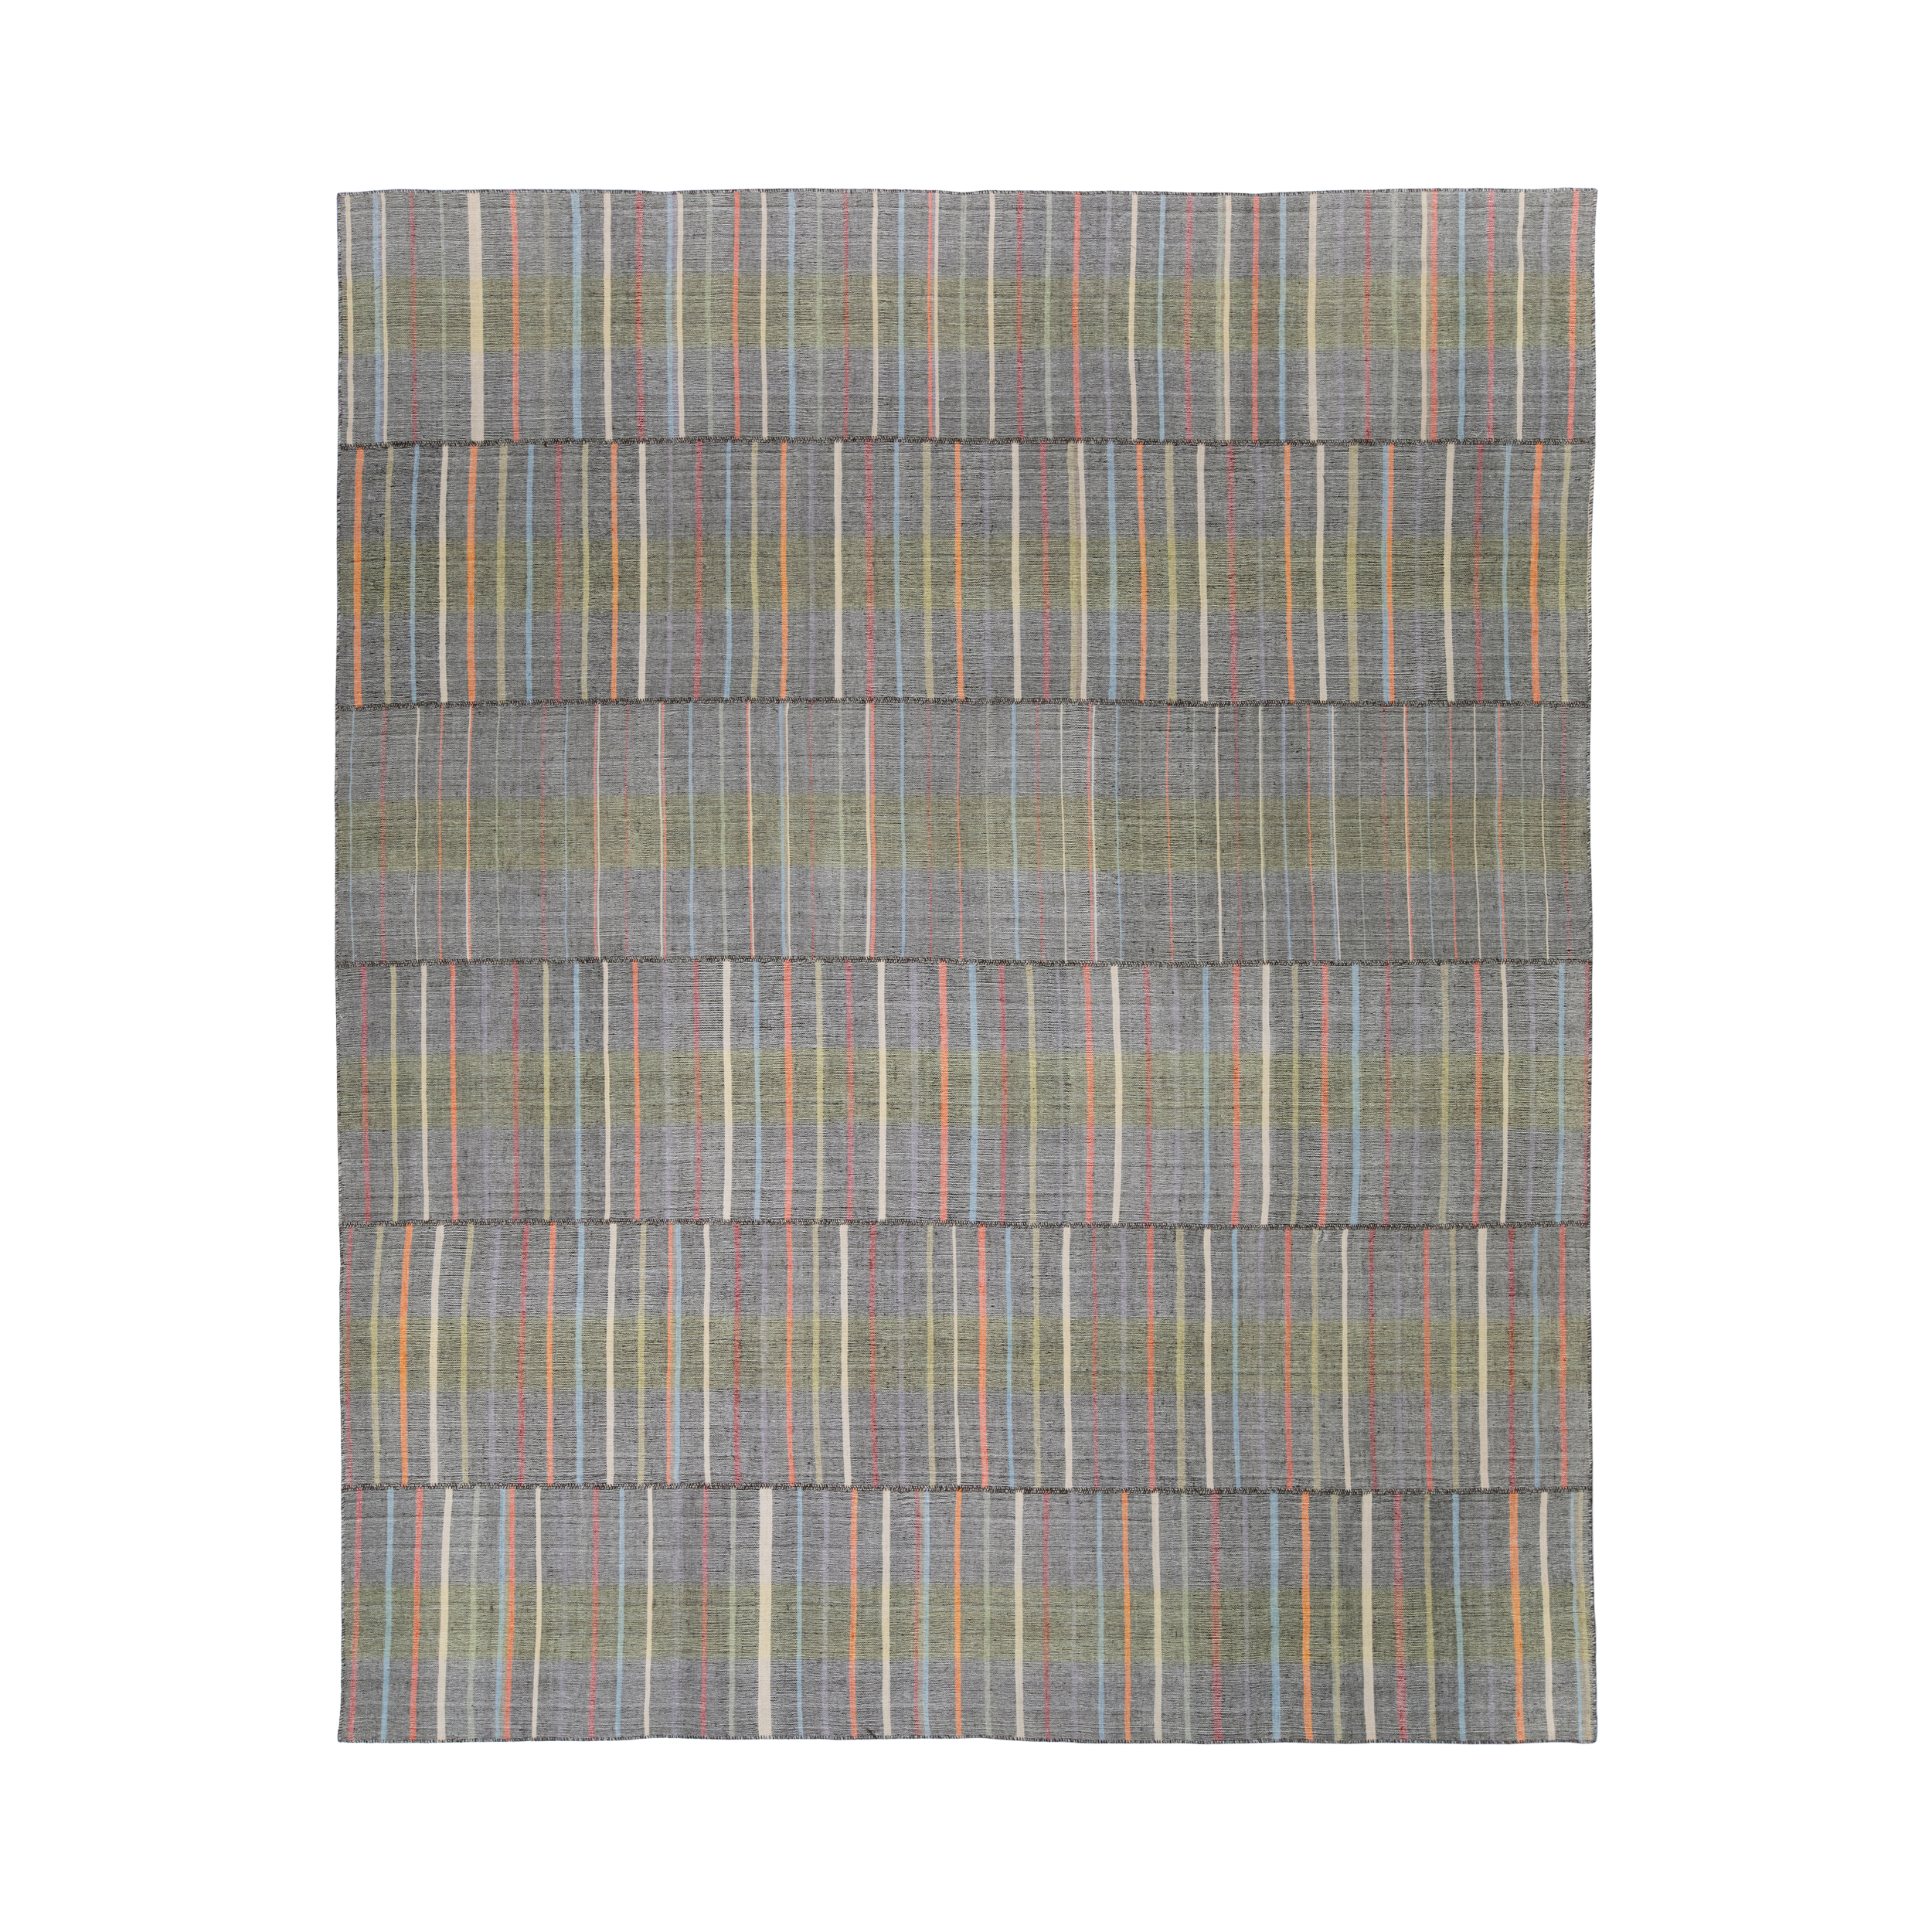 This Santiago rug is hand-woven and made of wool and cotton.